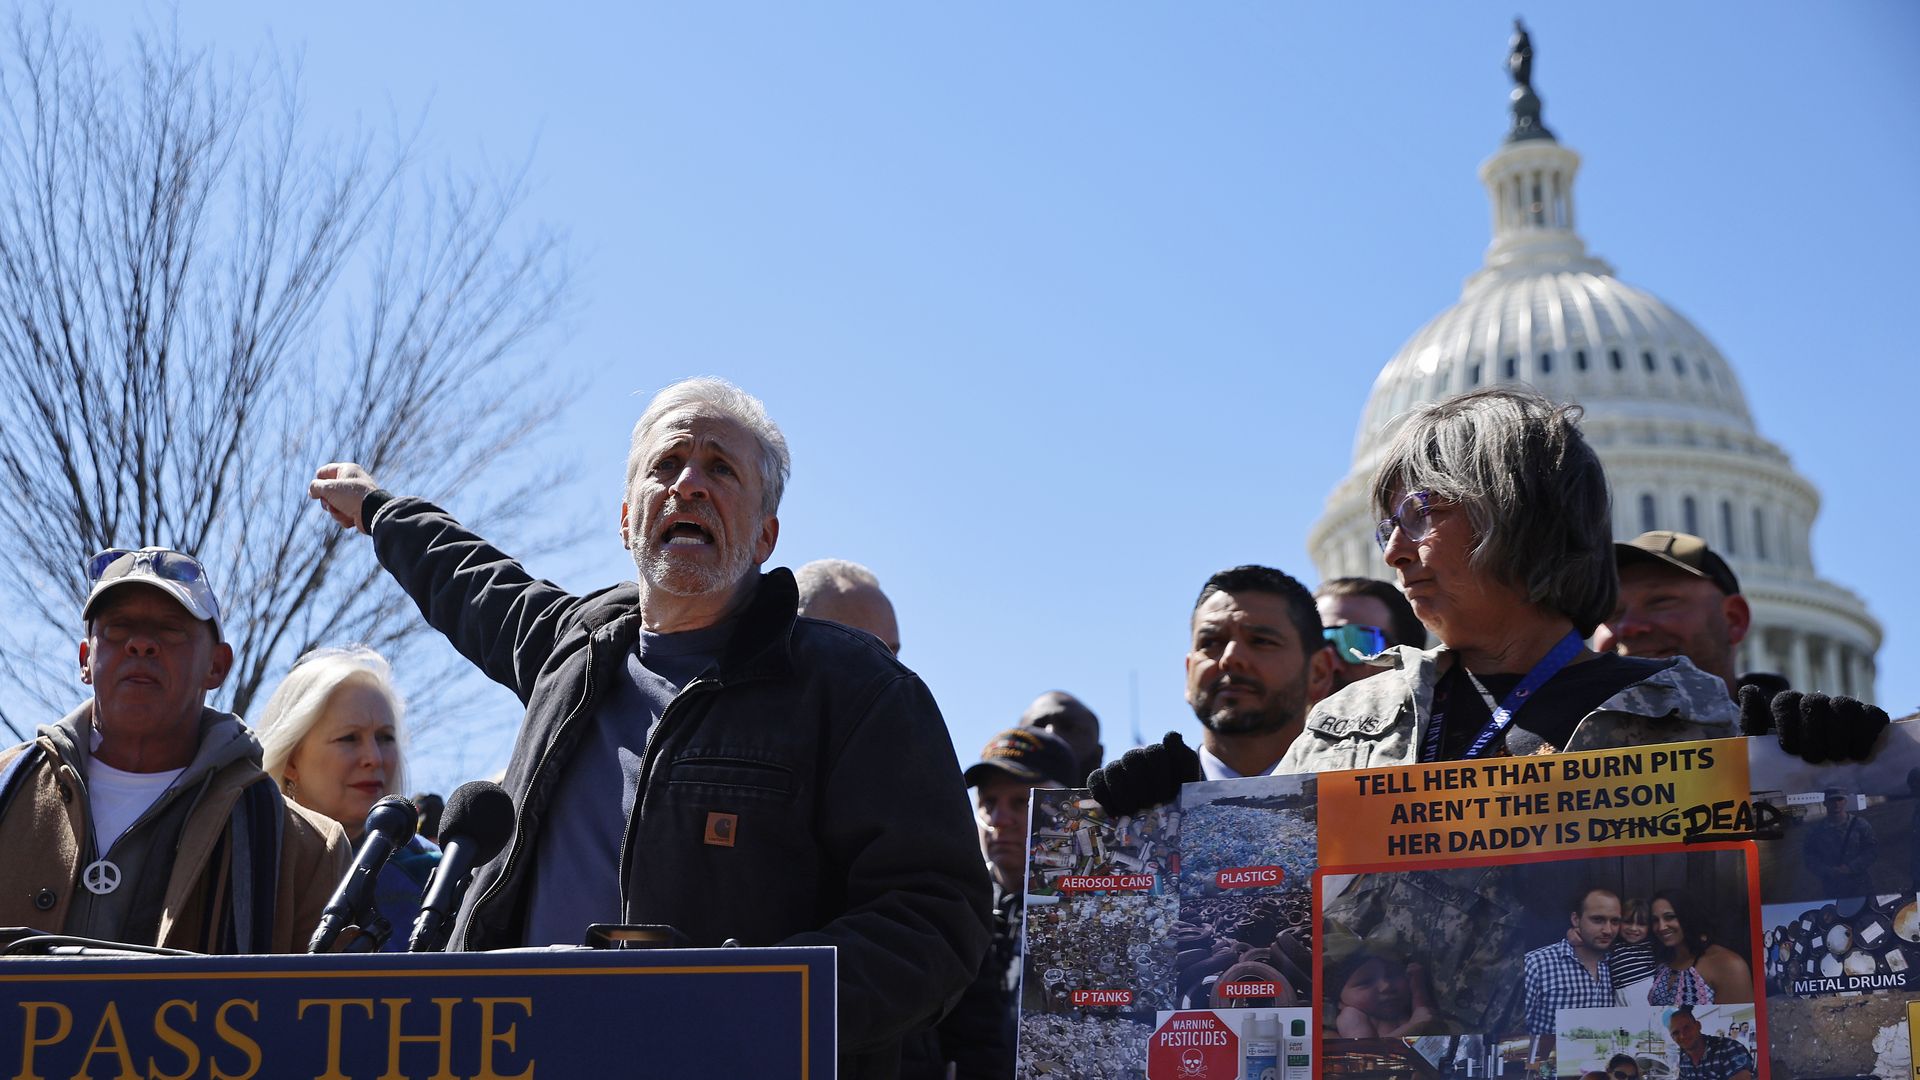 Jon Stewart (C) during a news conference about military burn pits legislation with veterans advocacy groups and Democratic members of Congress outside the U.S. Capitol on March 29.